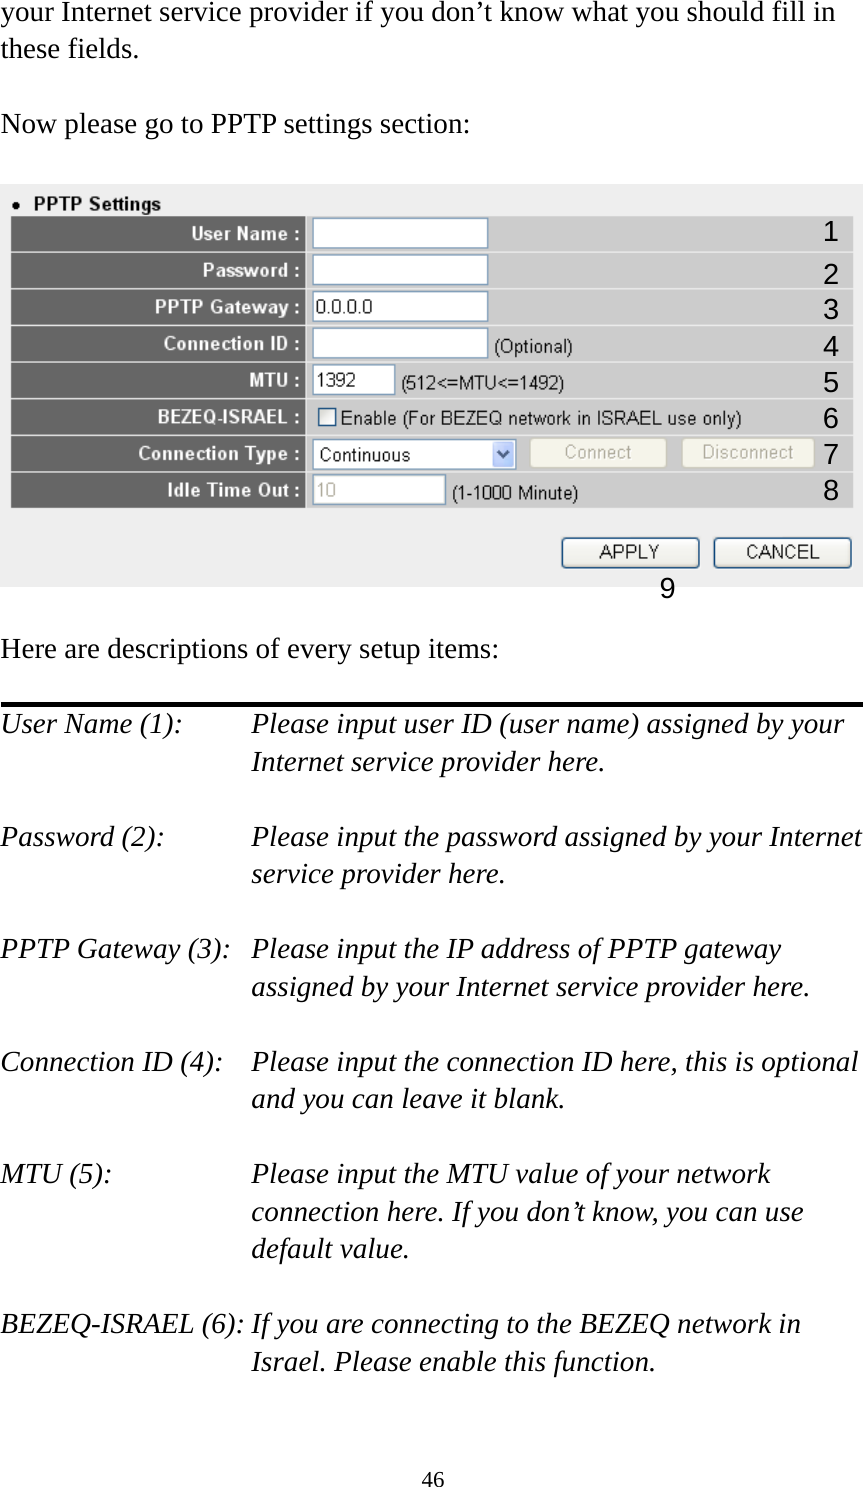 46 your Internet service provider if you don’t know what you should fill in these fields.  Now please go to PPTP settings section:    Here are descriptions of every setup items:  User Name (1):    Please input user ID (user name) assigned by your Internet service provider here.  Password (2):    Please input the password assigned by your Internet service provider here.  PPTP Gateway (3):   Please input the IP address of PPTP gateway assigned by your Internet service provider here.  Connection ID (4):    Please input the connection ID here, this is optional and you can leave it blank.  MTU (5):    Please input the MTU value of your network connection here. If you don’t know, you can use default value.  BEZEQ-ISRAEL (6): If you are connecting to the BEZEQ network in Israel. Please enable this function.  123 4 5 7 8 96 